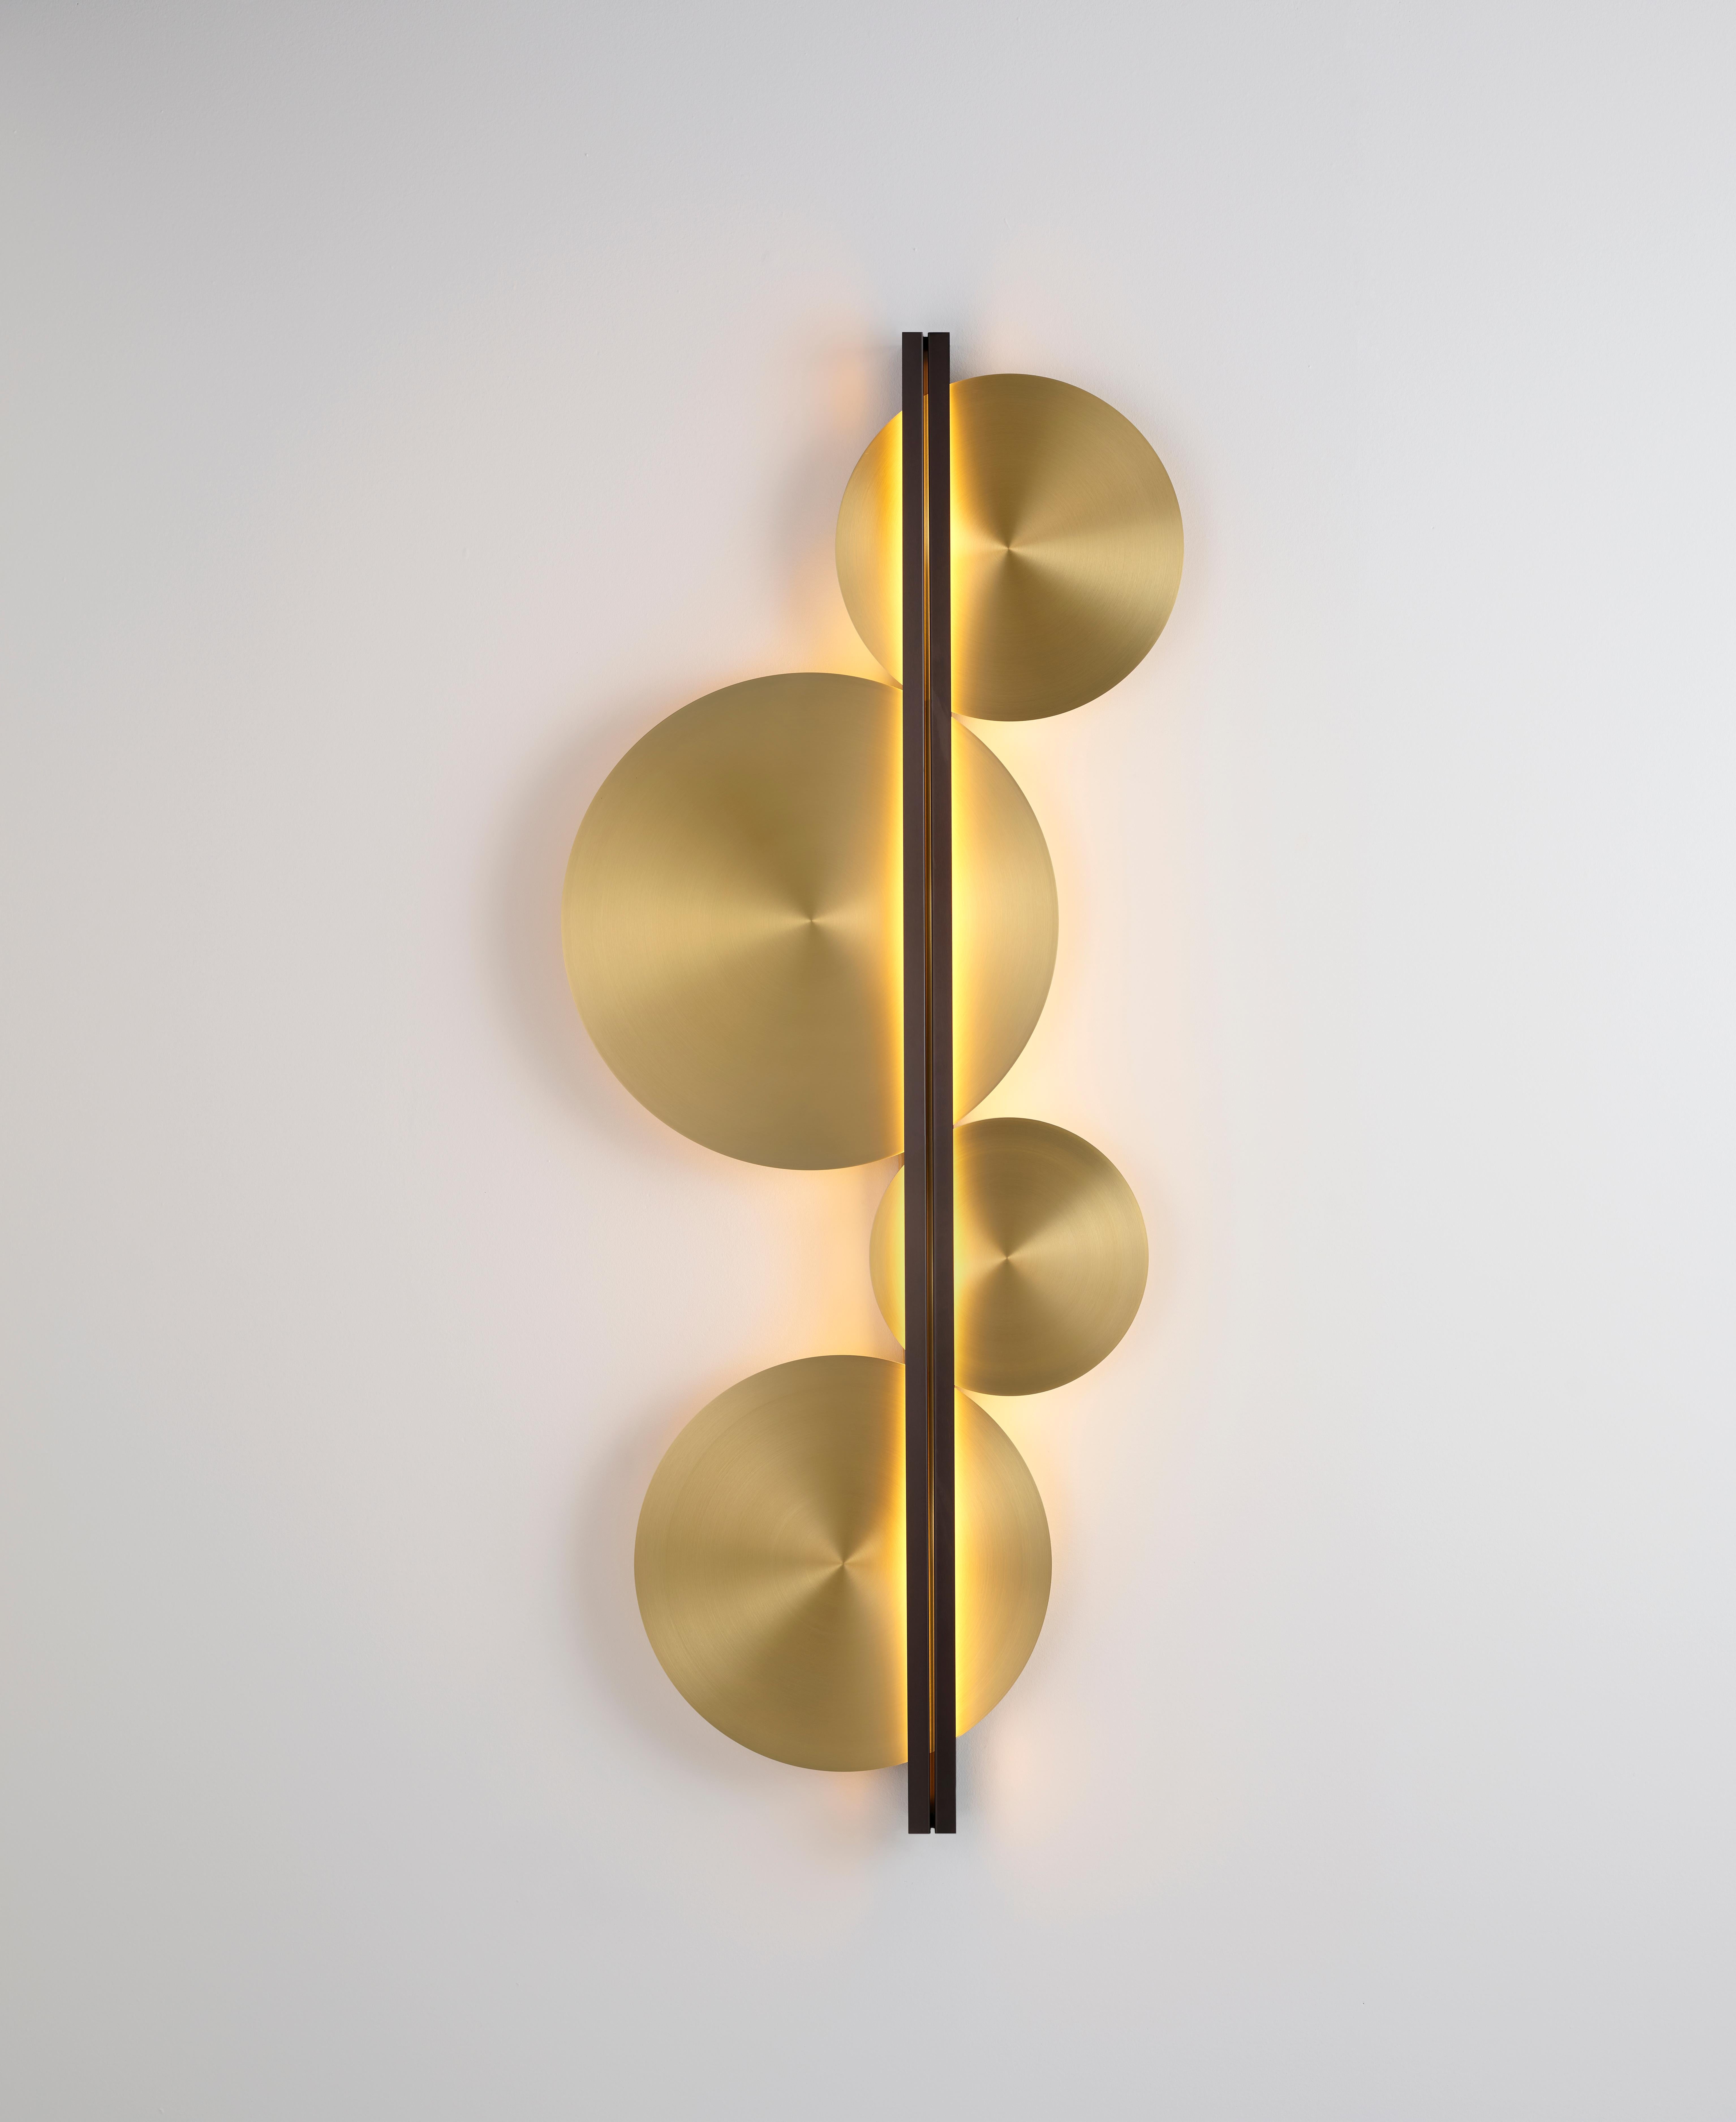 Strate moon wall light by Emilie Cathelineau
Dimensions: W 62.9 x D 8.7 x H 150 cm
Materials: solid brass, polycarbonate diffuser.
Others finishes and dimensions are available.

All our lamps can be wired according to each country. If sold to